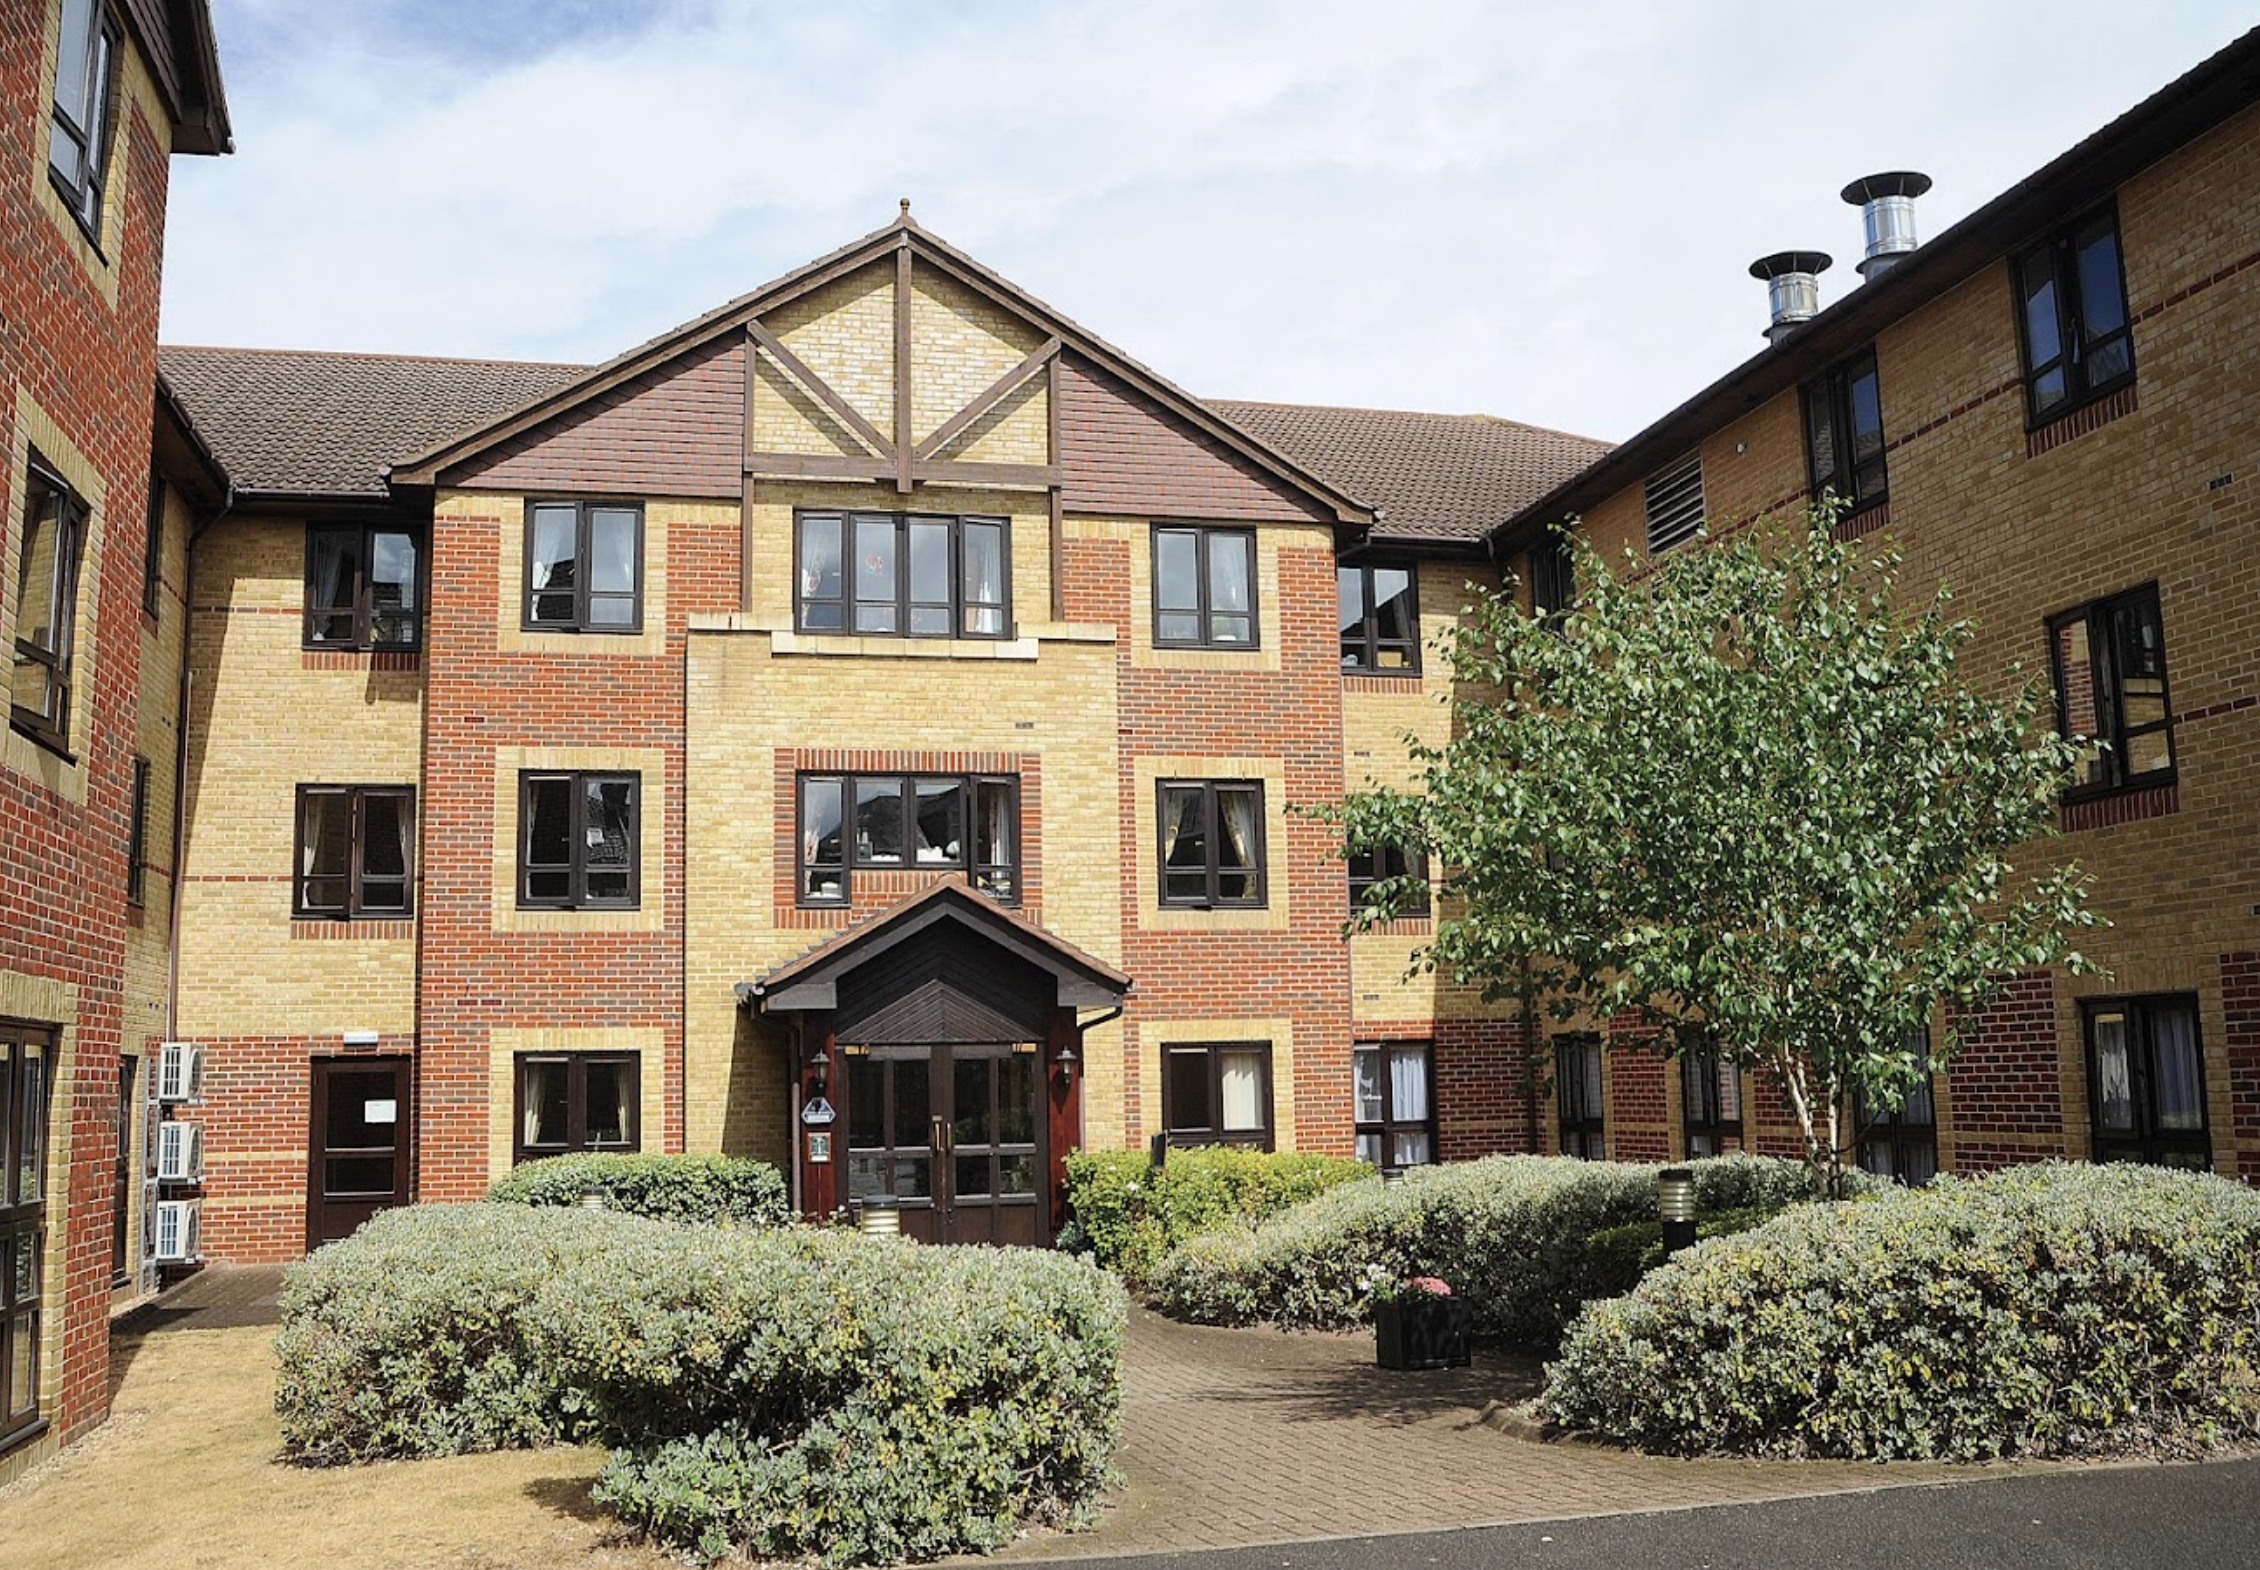 Exterior of The Sidcup care home in Sidcup, Kent